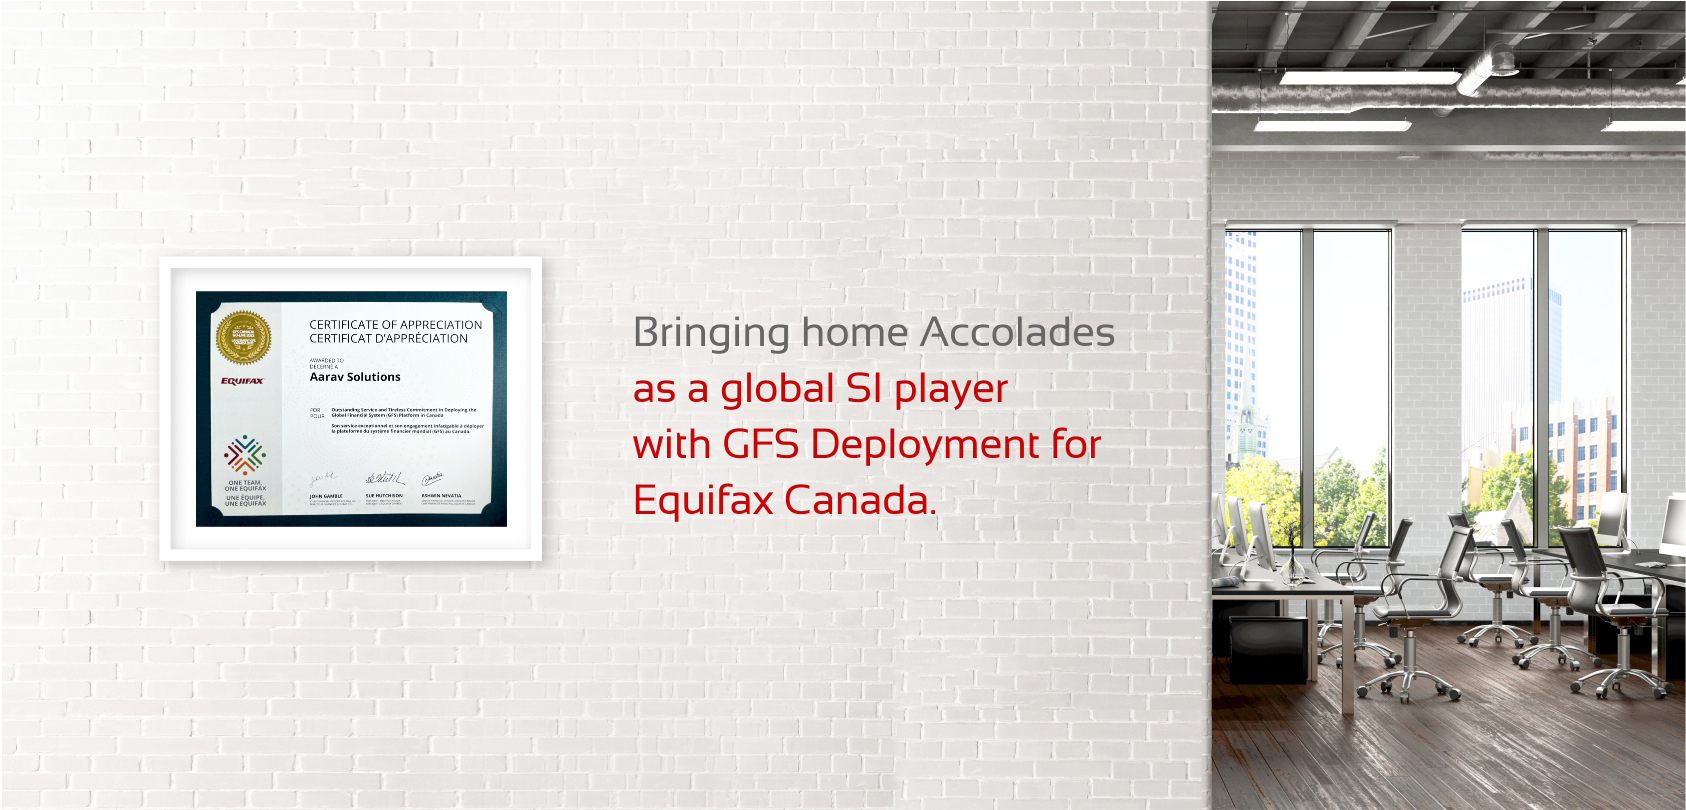 In News: Aarav Solutions enables Equifax® Canada to launch new automated and cloud-based billing and invoicing system